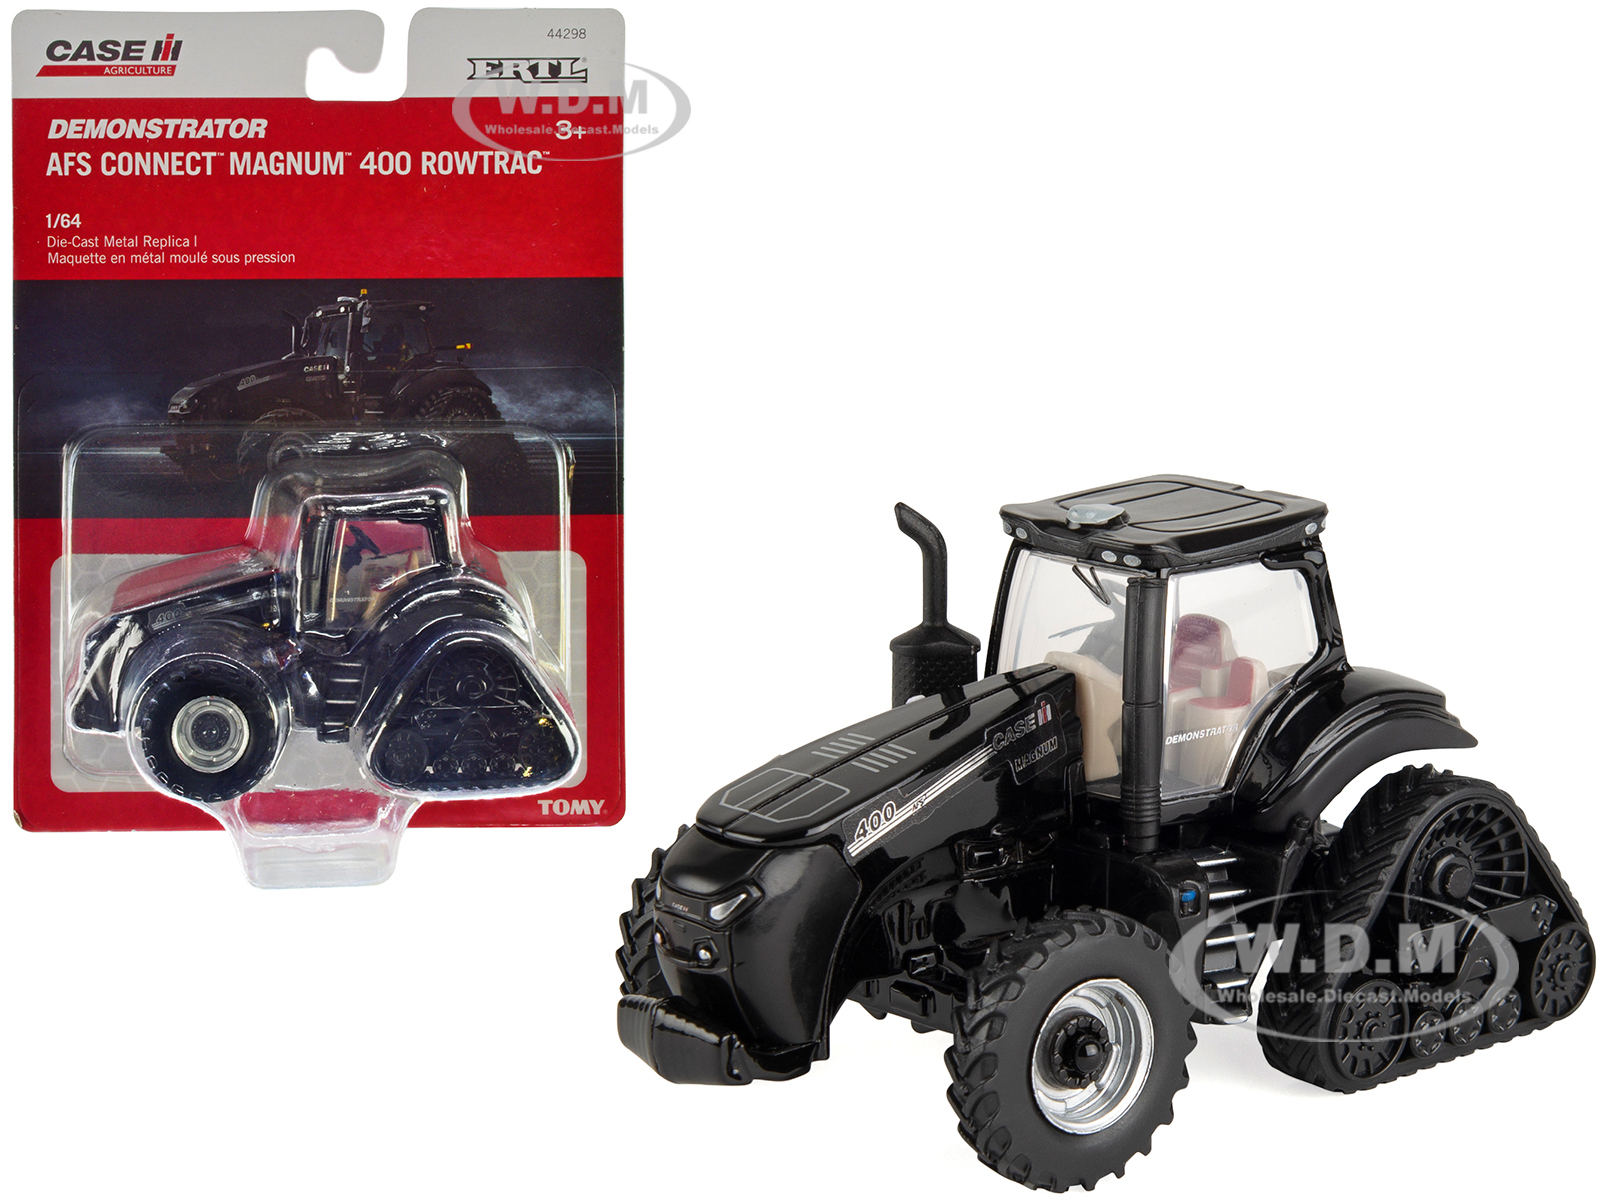 Case IH AFS Connect Magnum 400 RowTrac "Demonstrator" Half-Tracked Tractor Black "Case IH Agriculture" 1/64 Diecast Model by ERTL TOMY